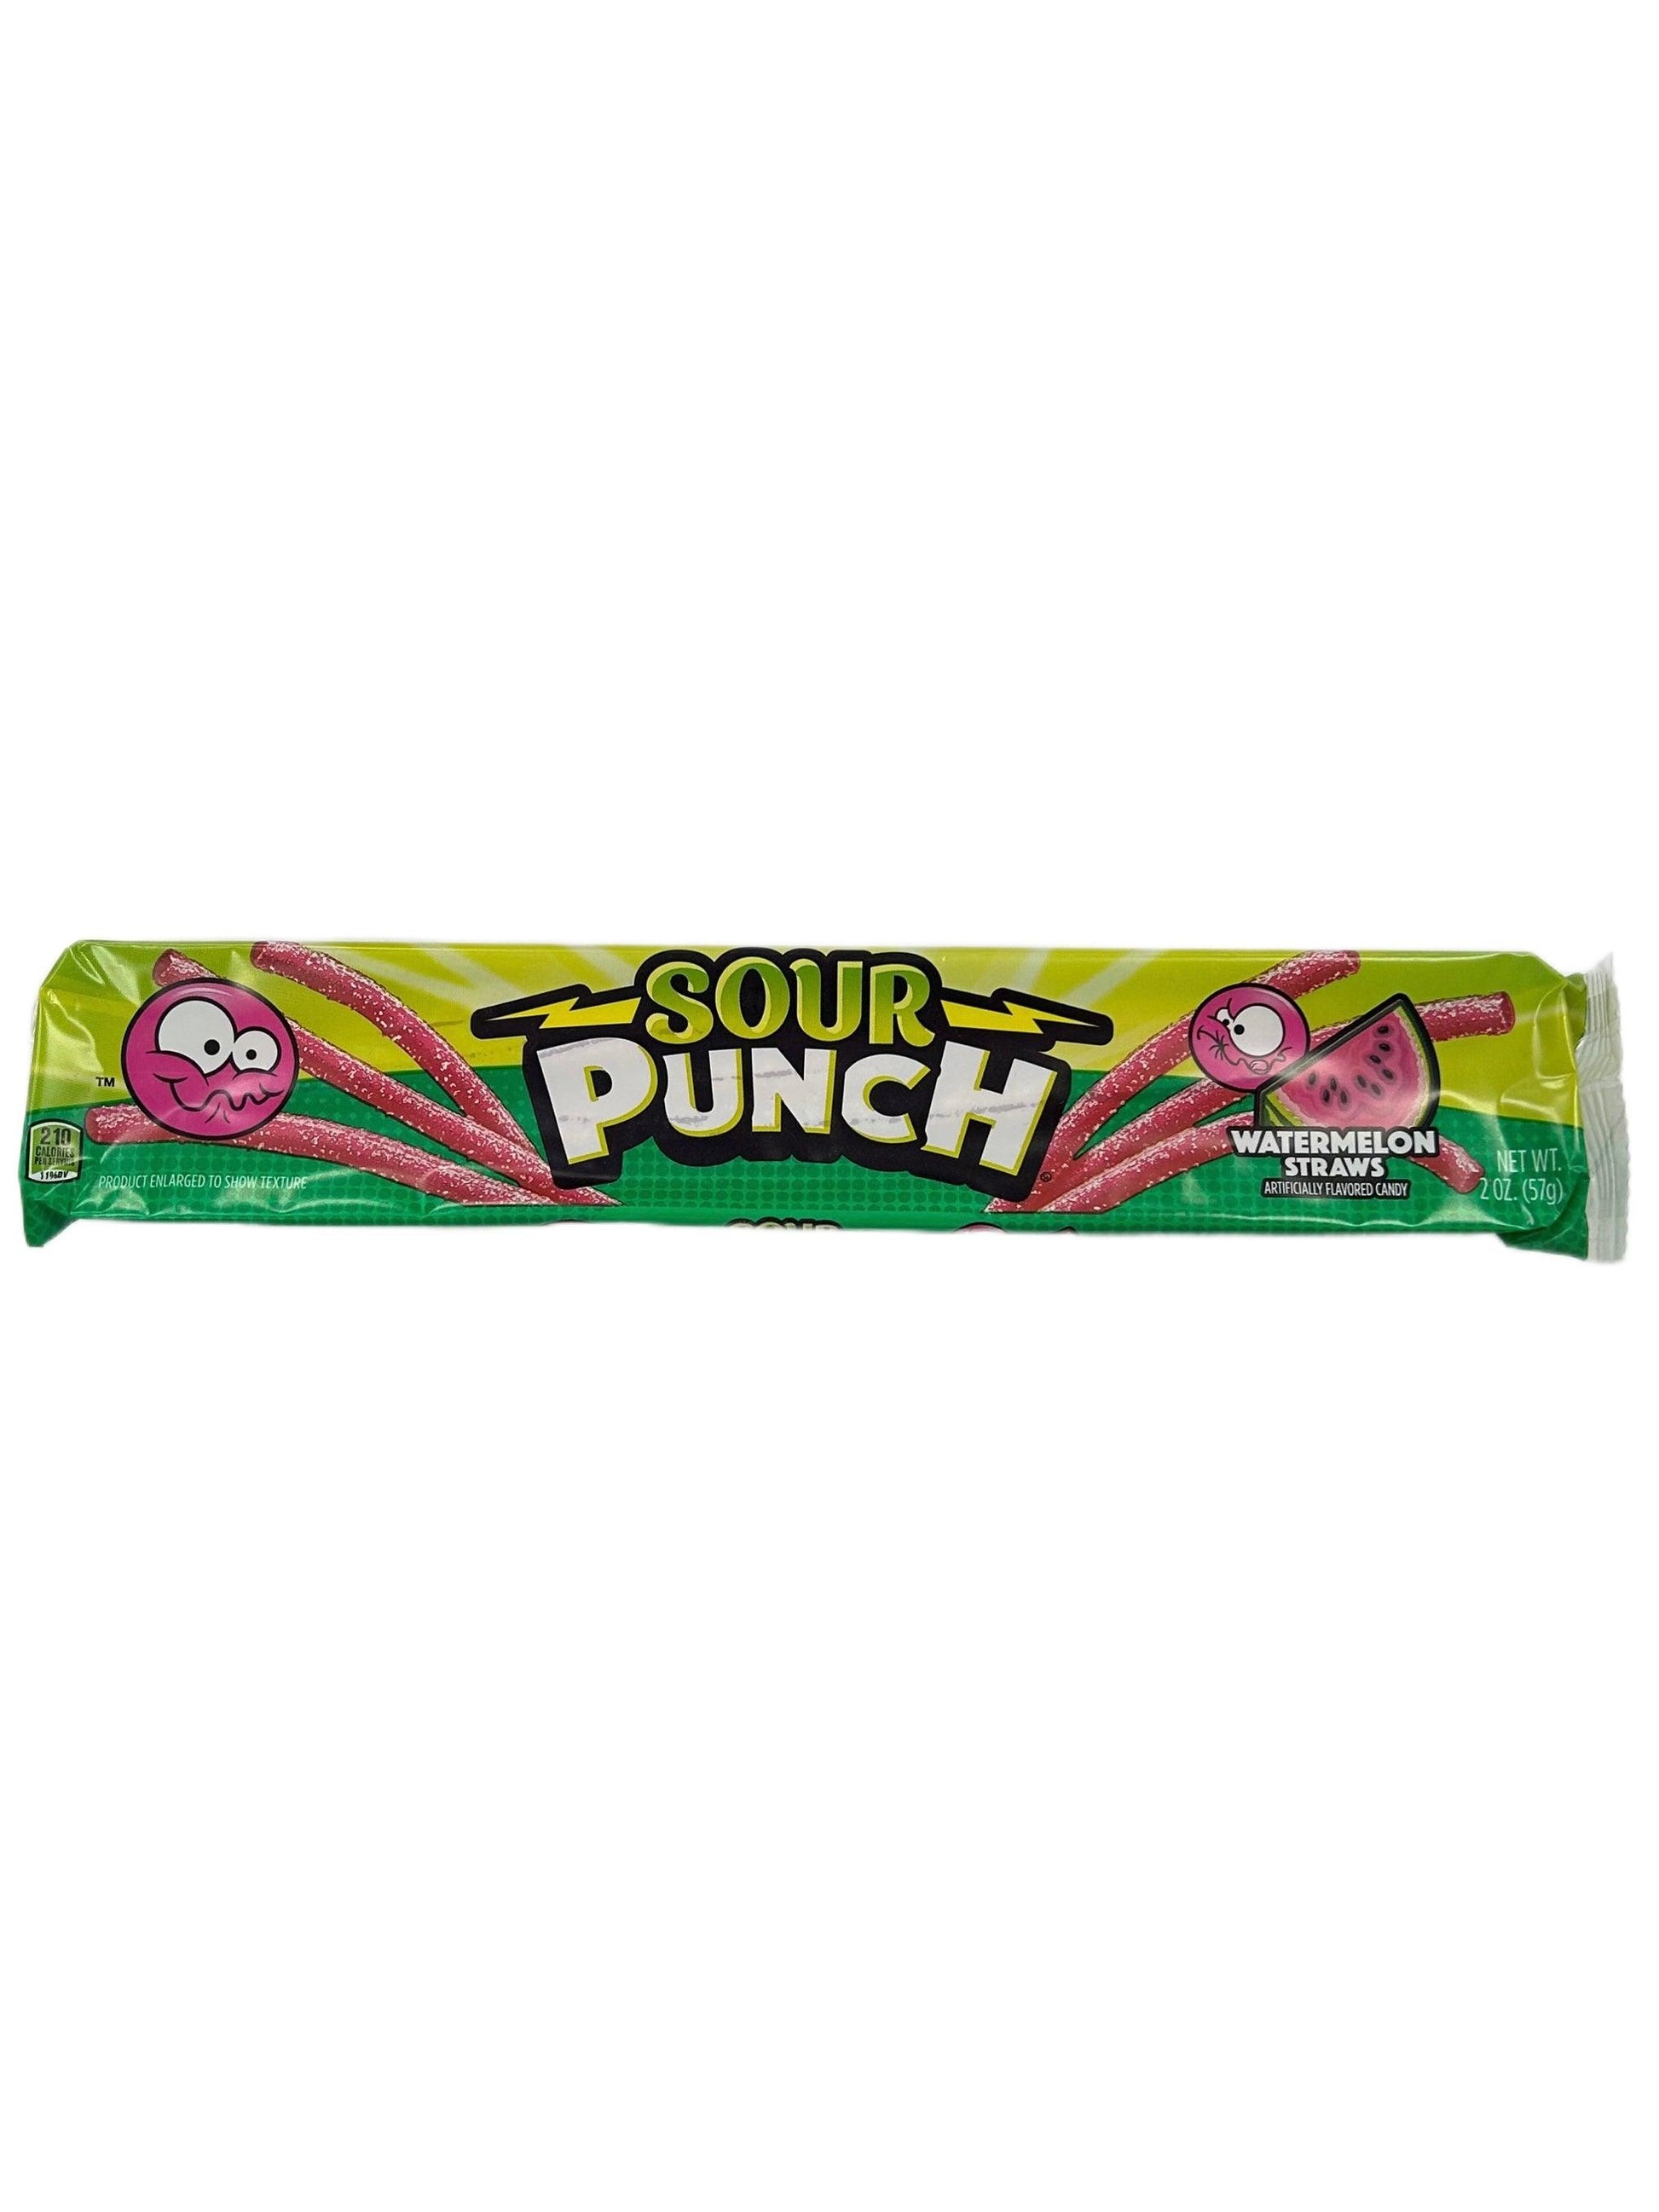 Sour Punch Straws - Extreme Snacks